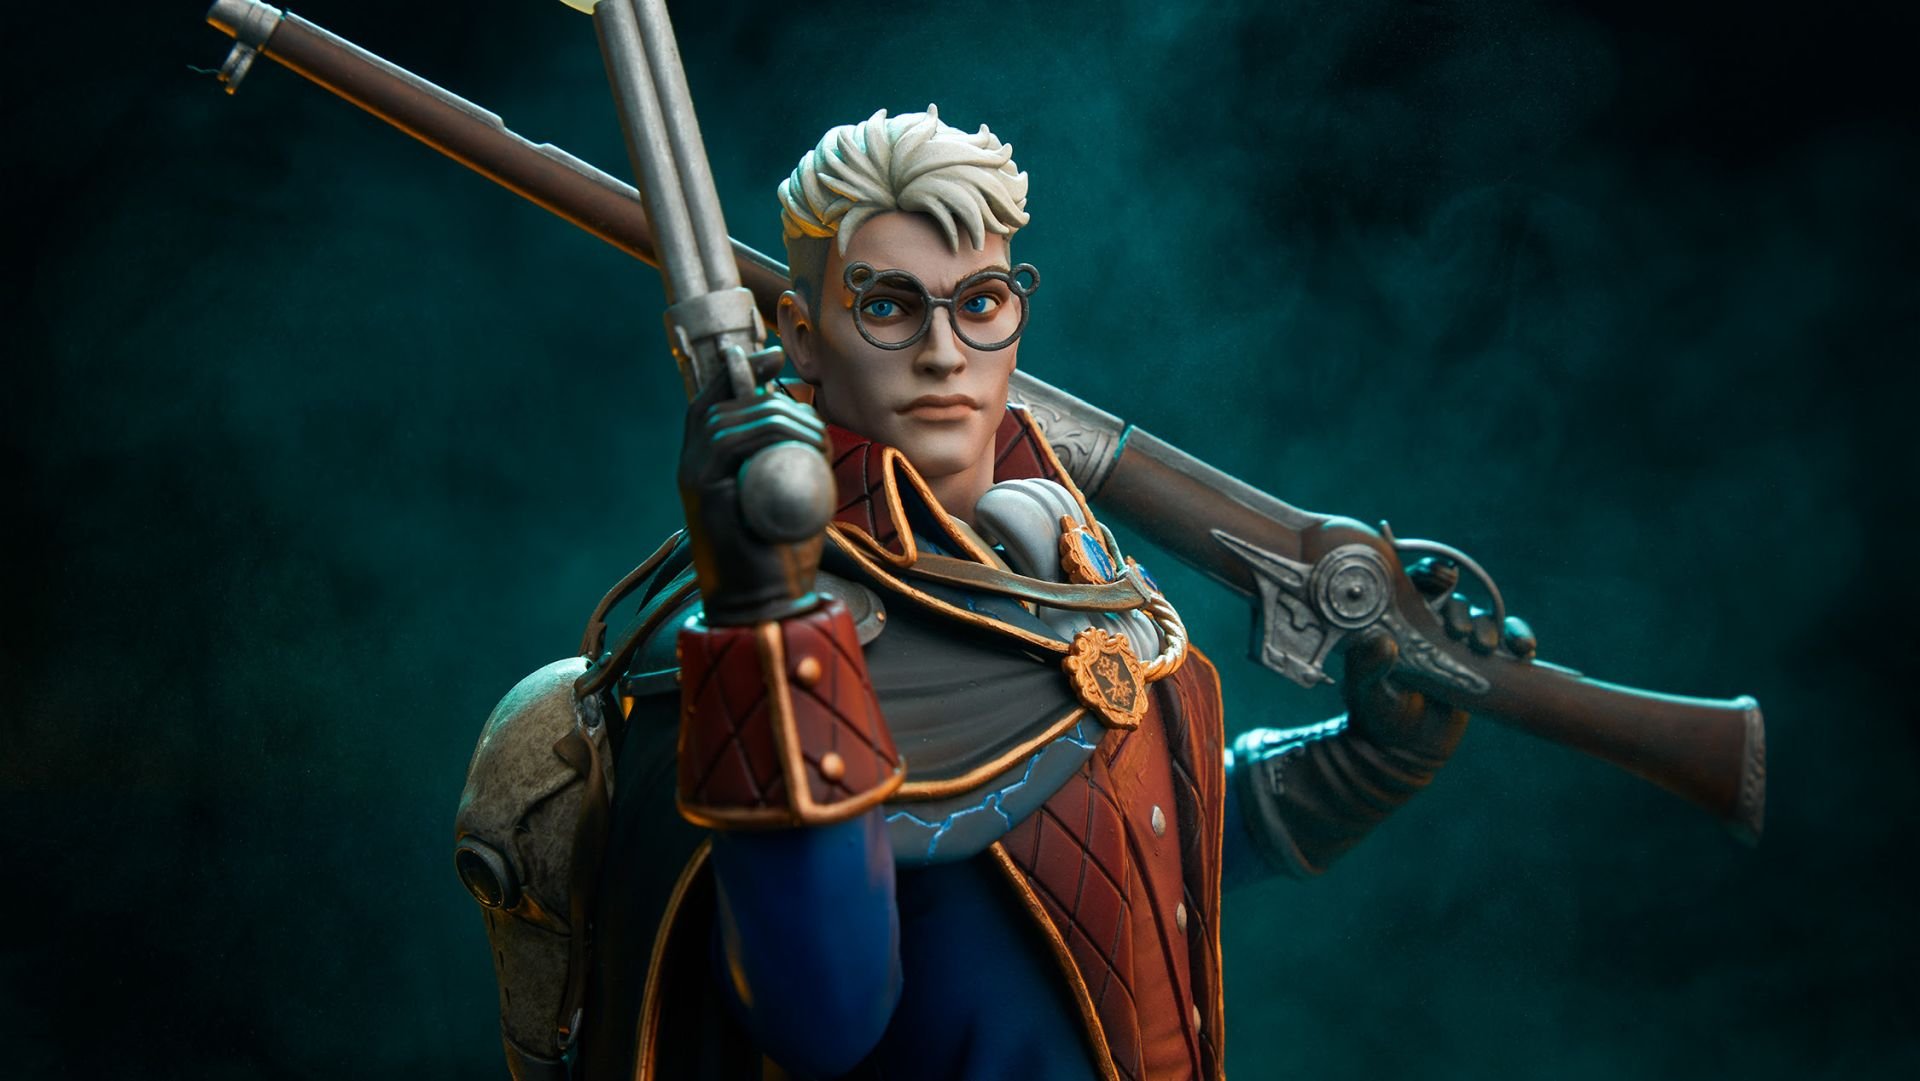 Accursed — The Legend of Vox Machina character posters: Percy